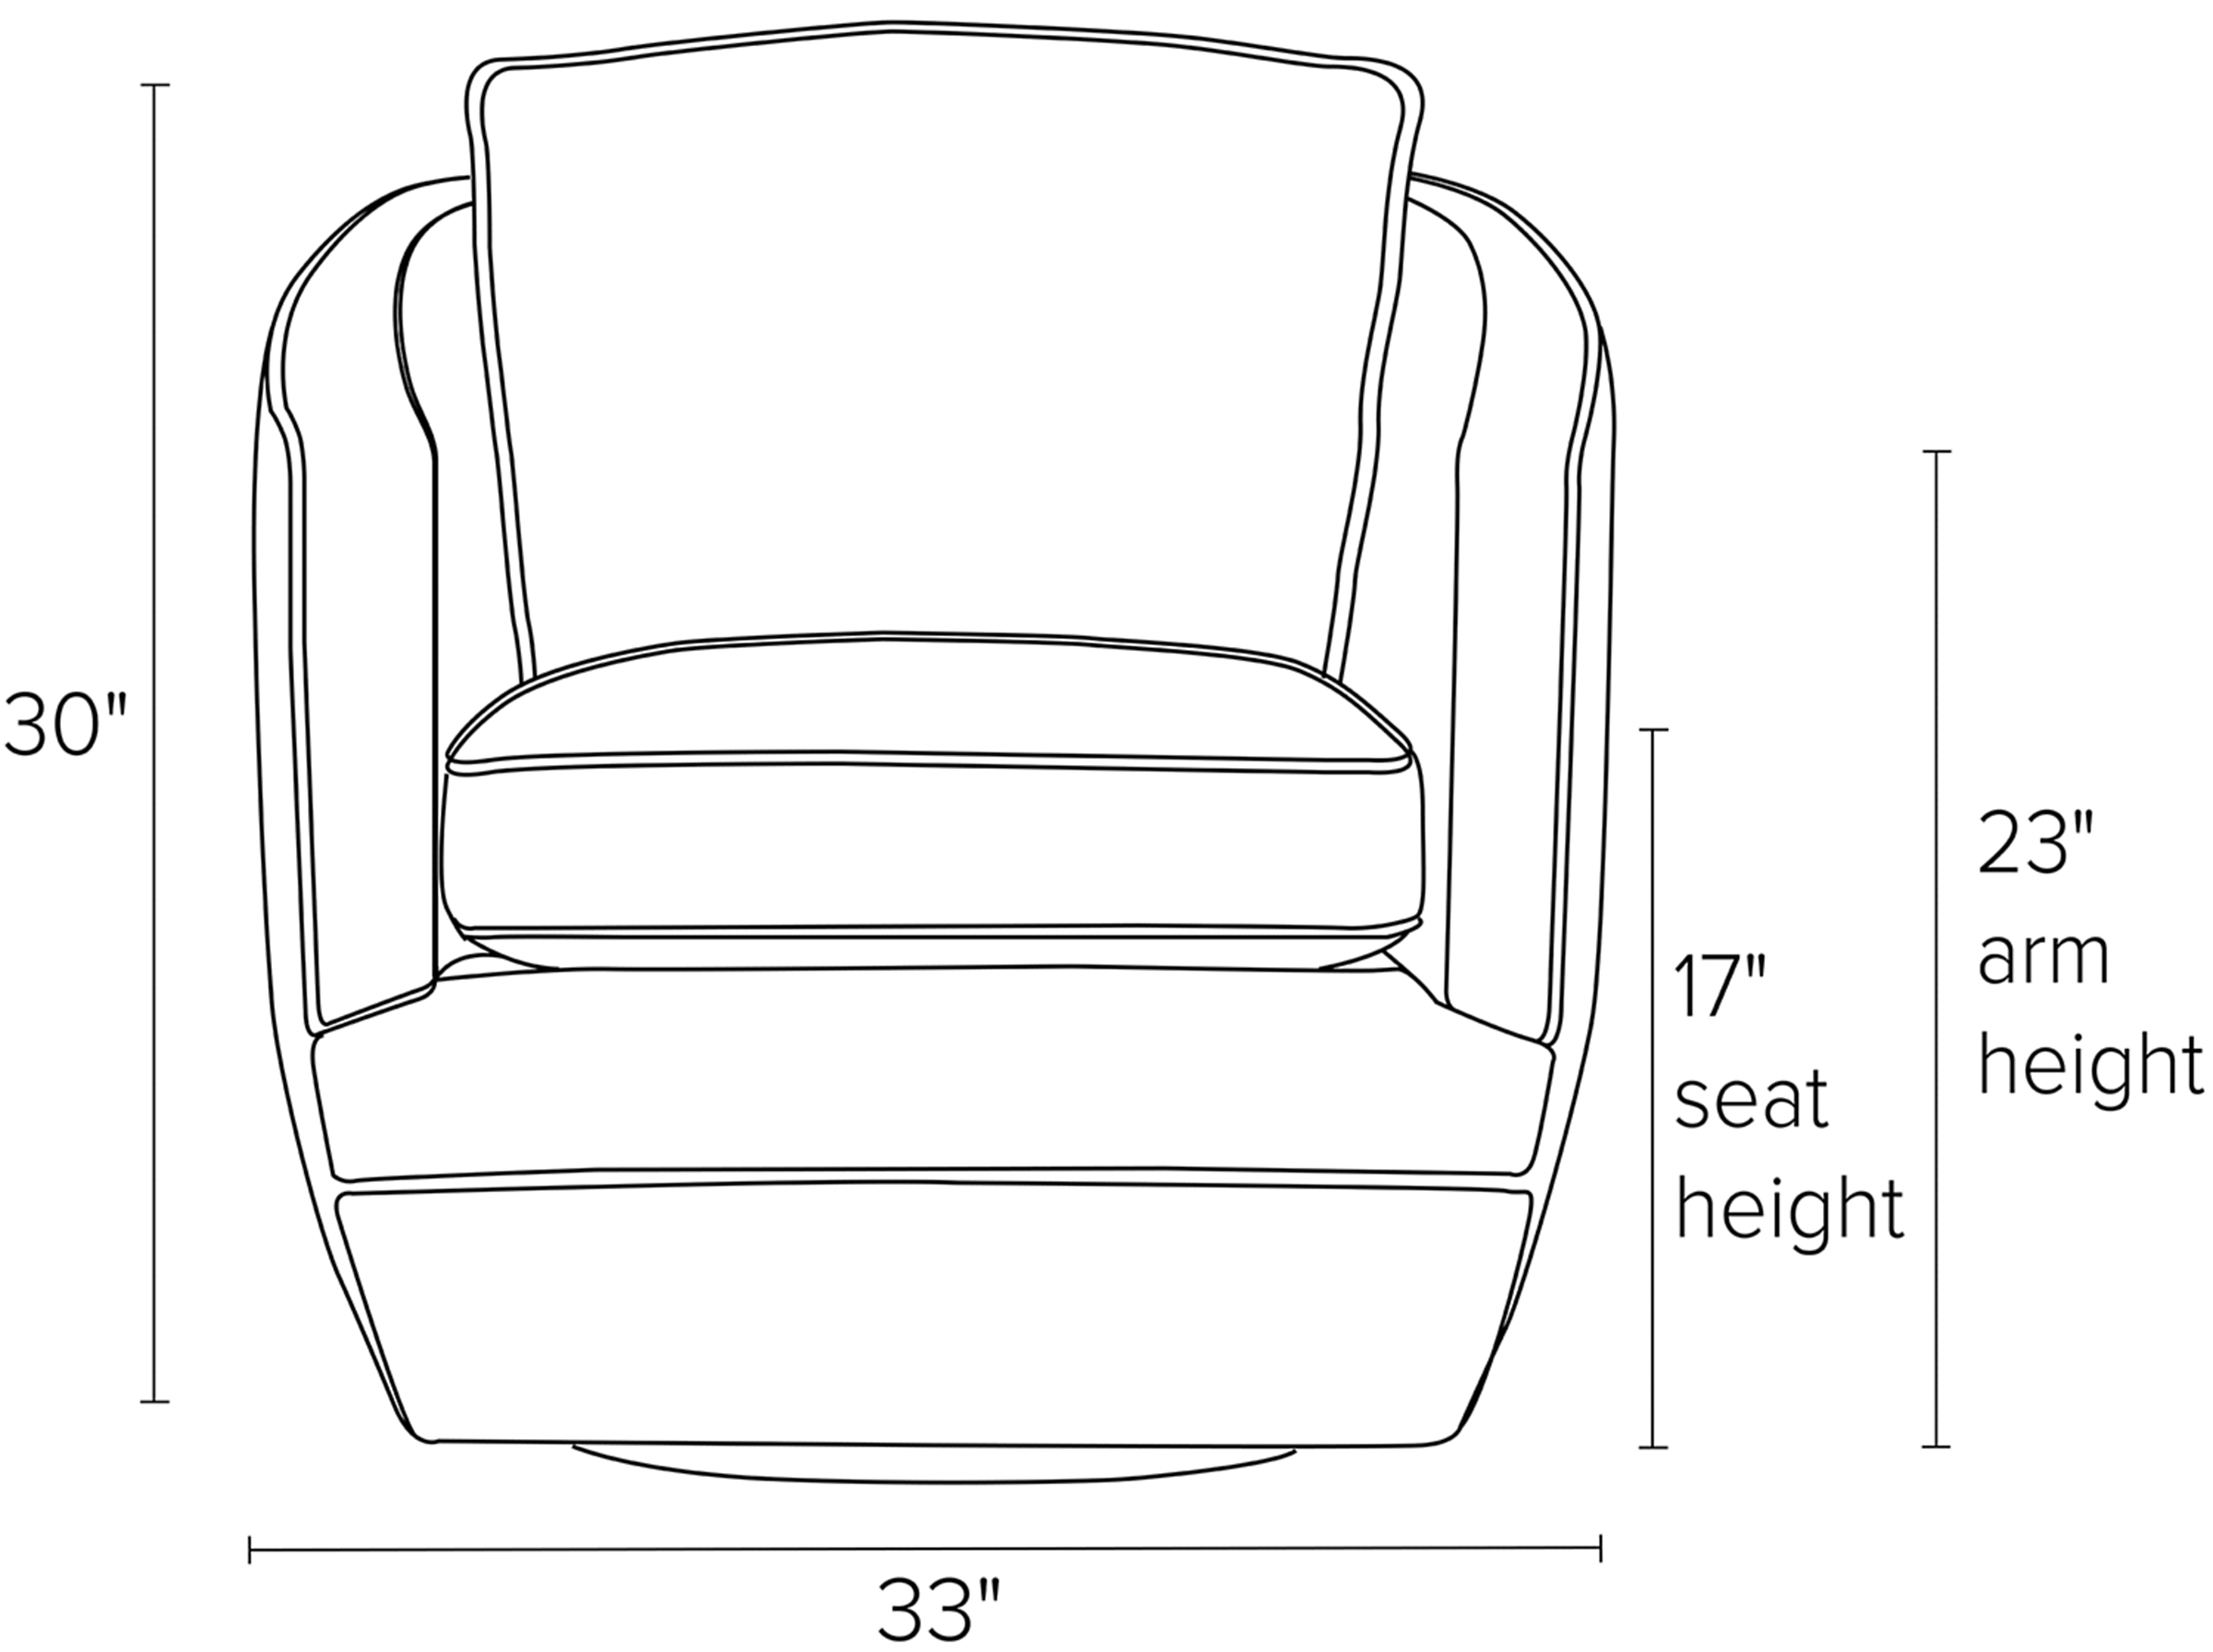 Front view dimension illustration of Ford swivel chair.